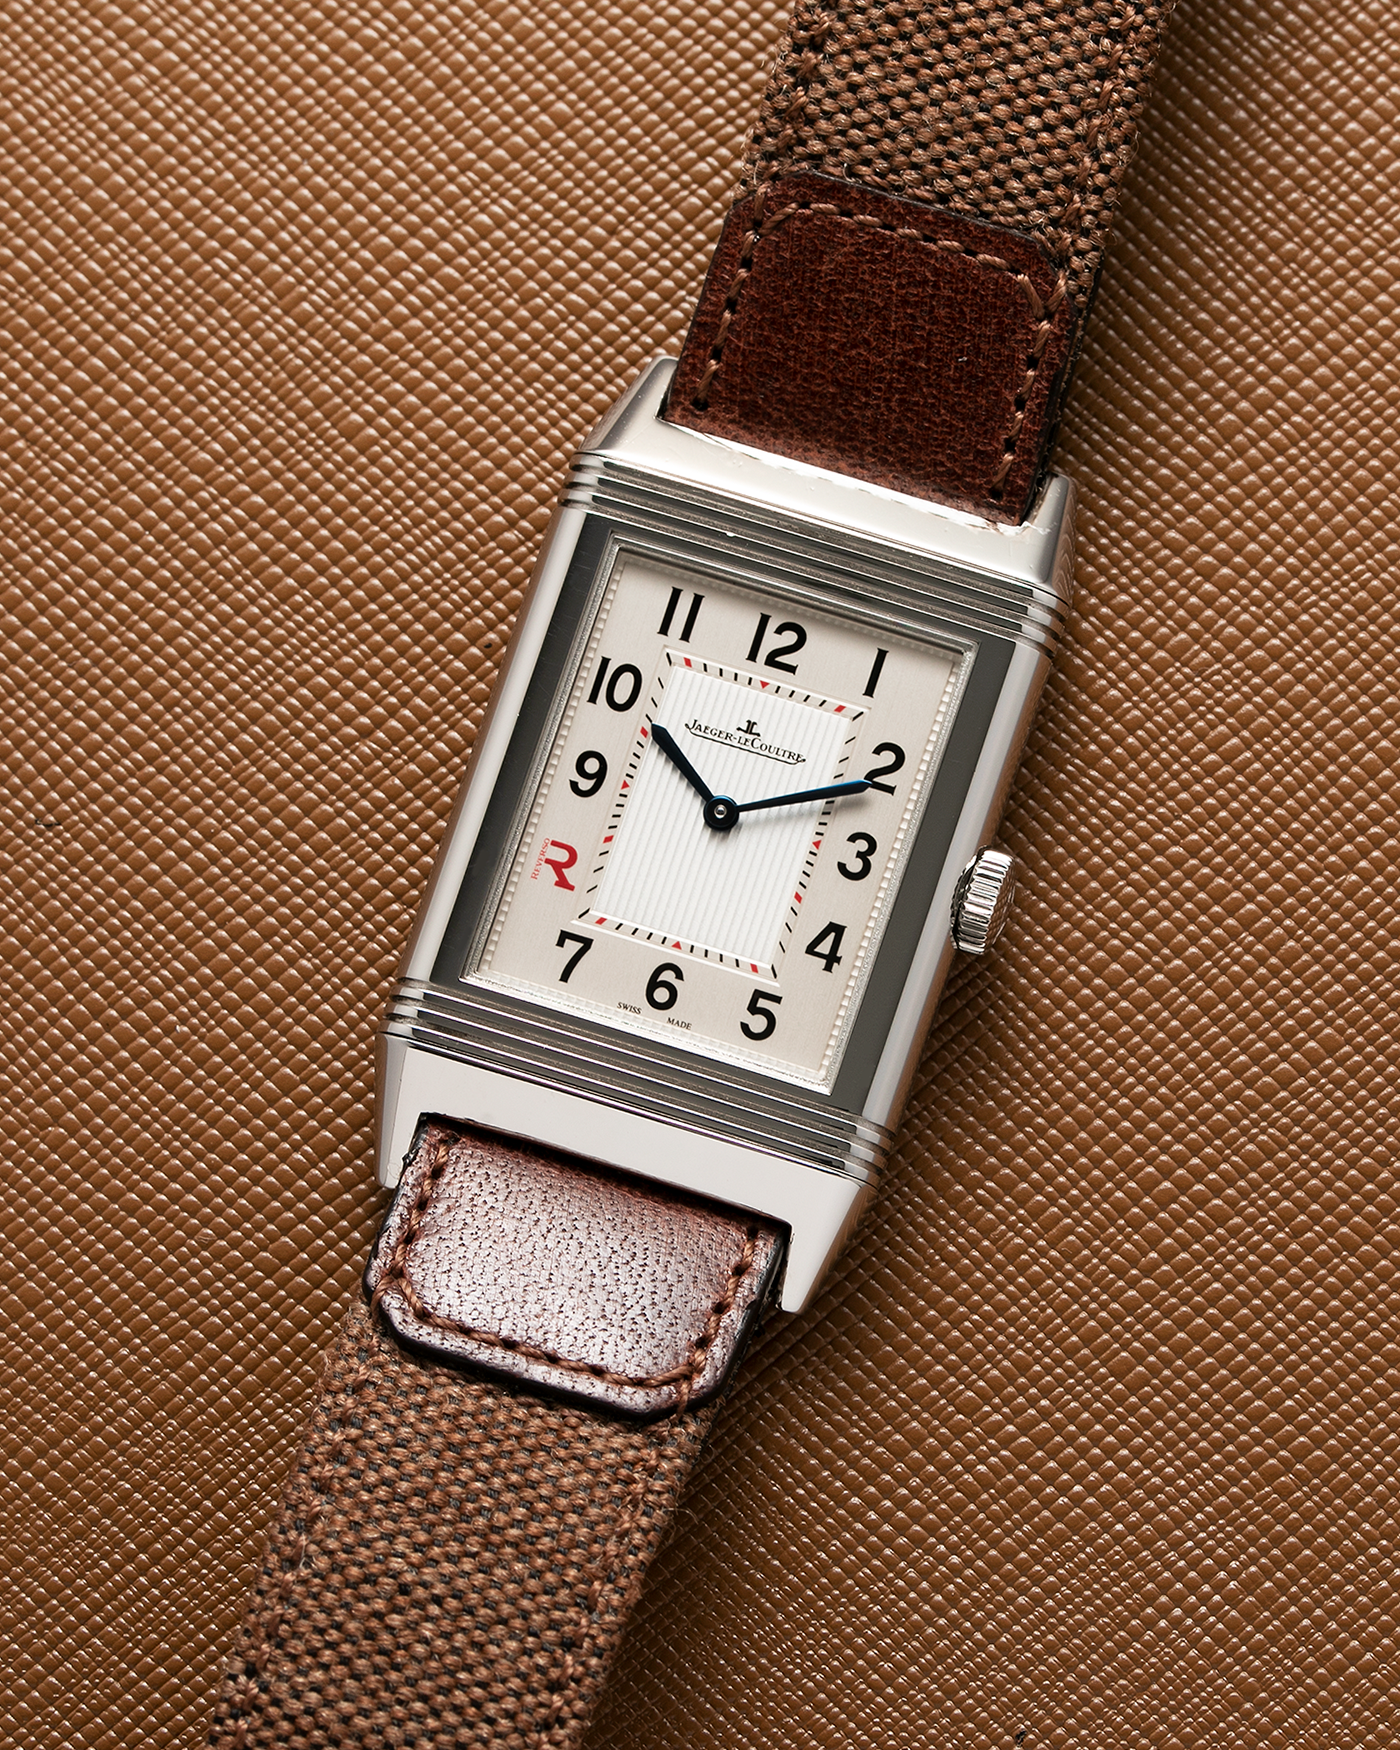 Brand: Jaeger LeCoultre Year: 2011 Model: Grande Reverso Ultra Thin Edizione Speciale Italica Ref 277.8.62 Material: Stainless Steel Movement: JLC Cal. 822, Manual-Wind Case Diameter: 46mm x 27mm Bracelet/Strap: Jaeger LeCoultre Case Fagliomo Brown Canvas Strap with Signed Tang Buckle